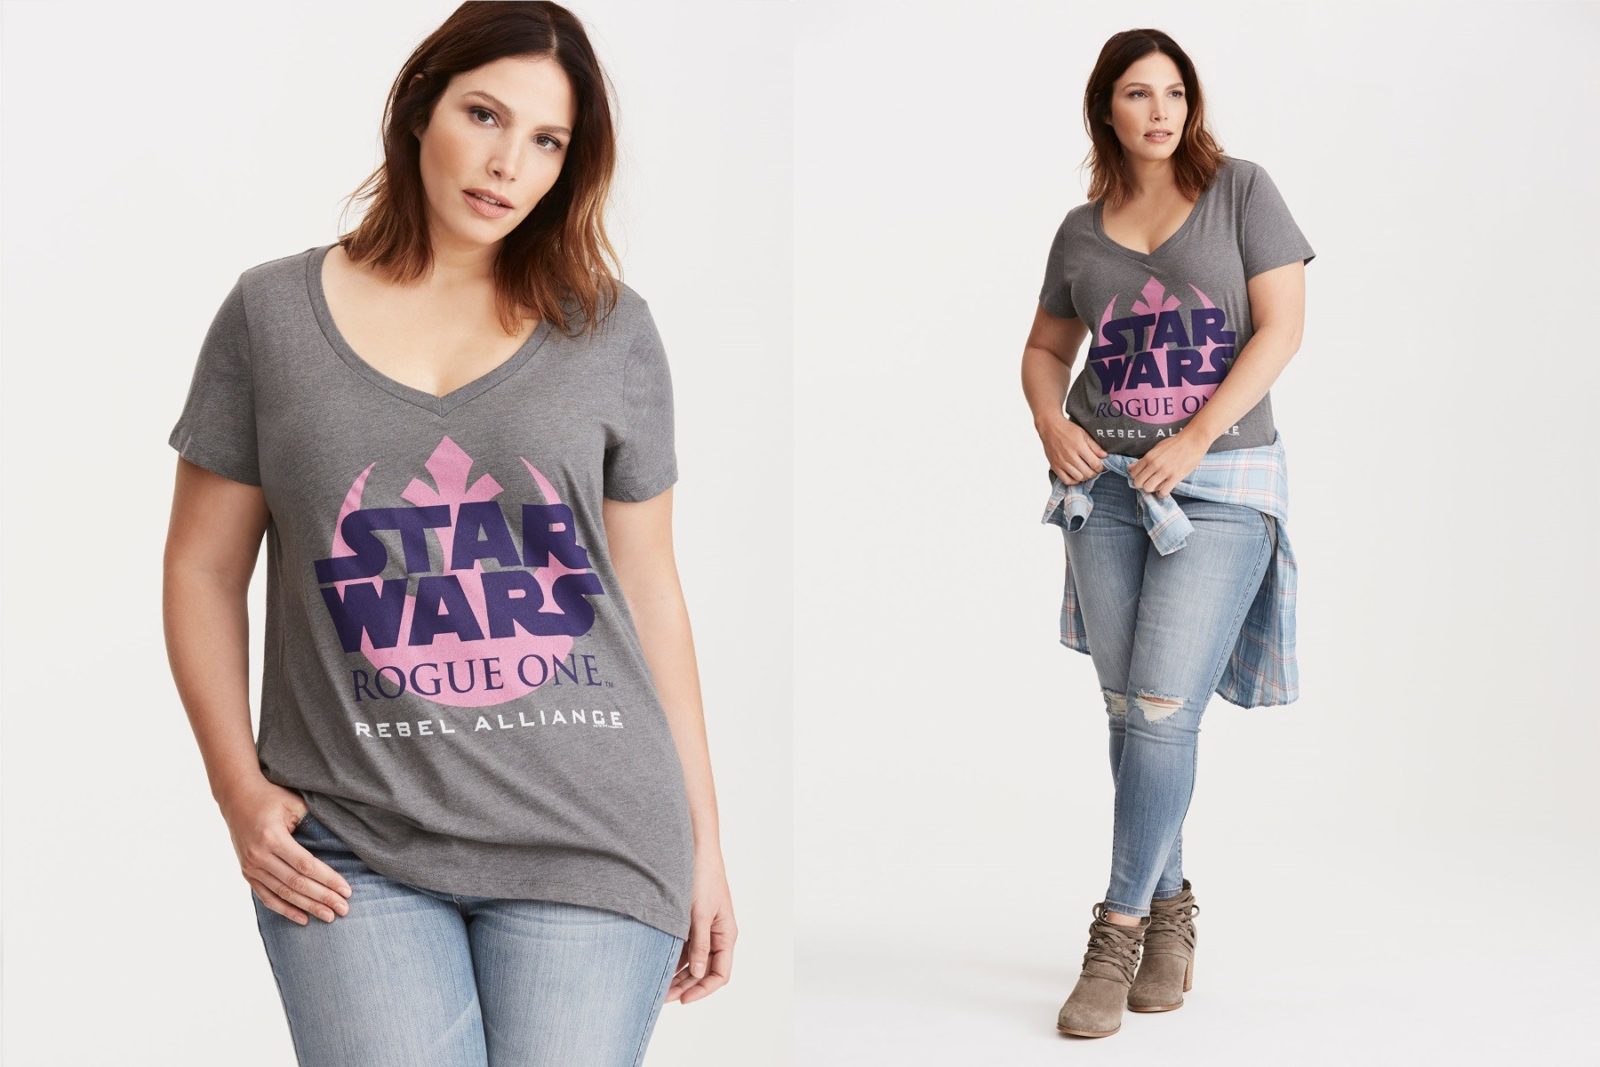 Women's Star Wars v-neck plus size t-shirt available at Torrid